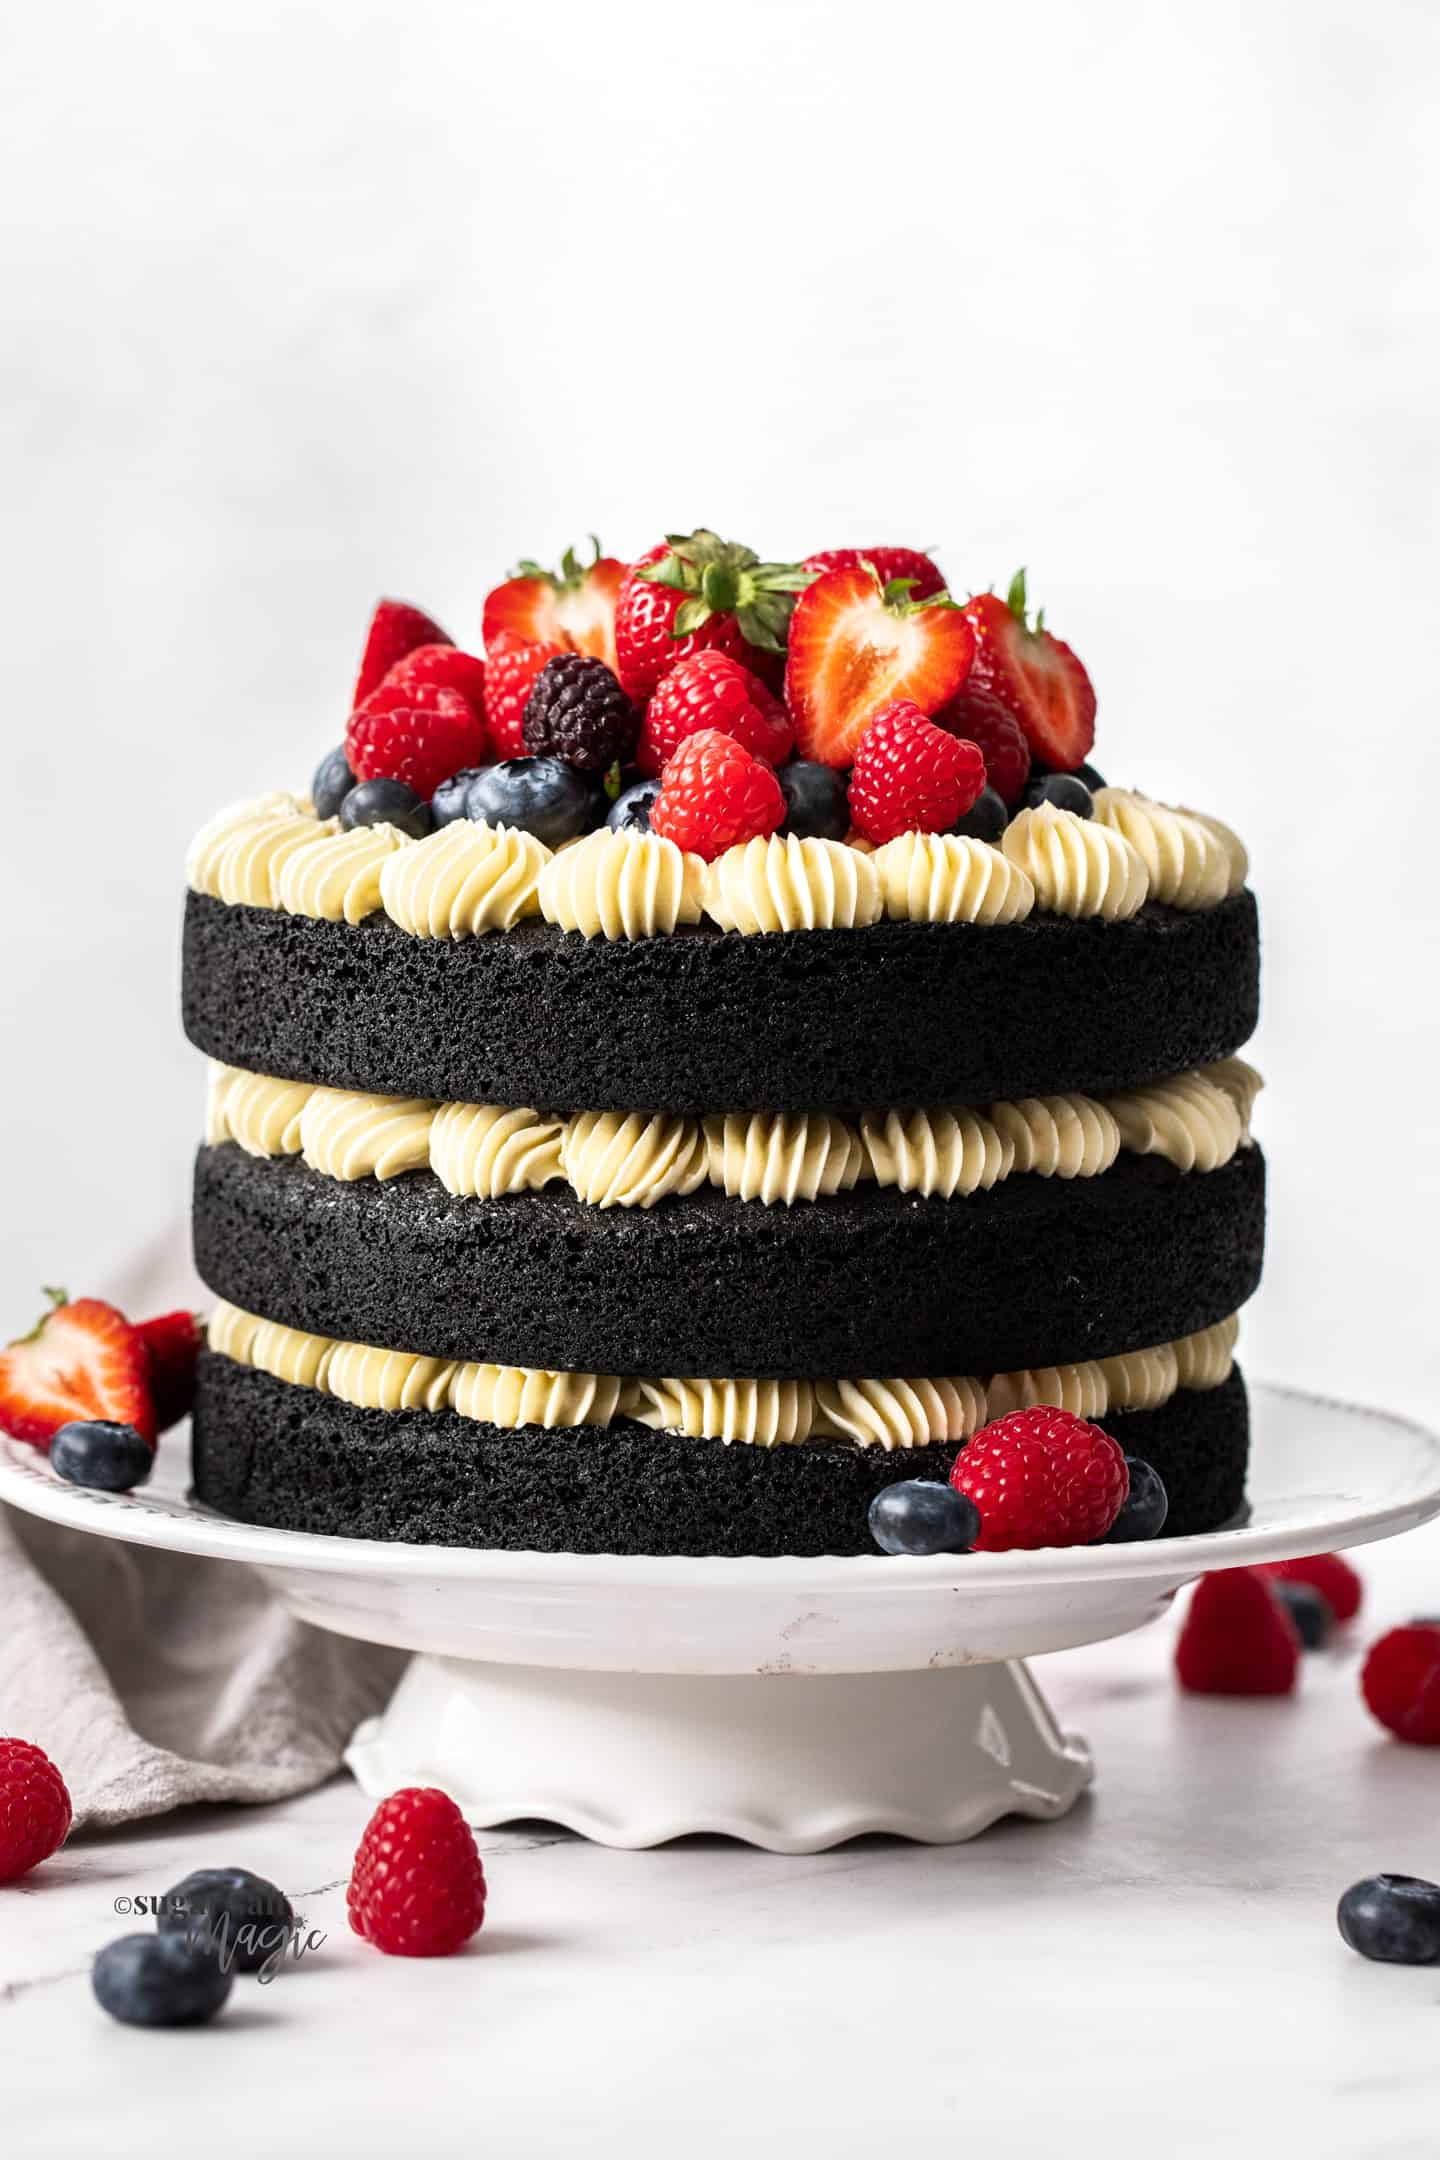 Front on view of a 3 tier black velvet cake topped with fresh berries.